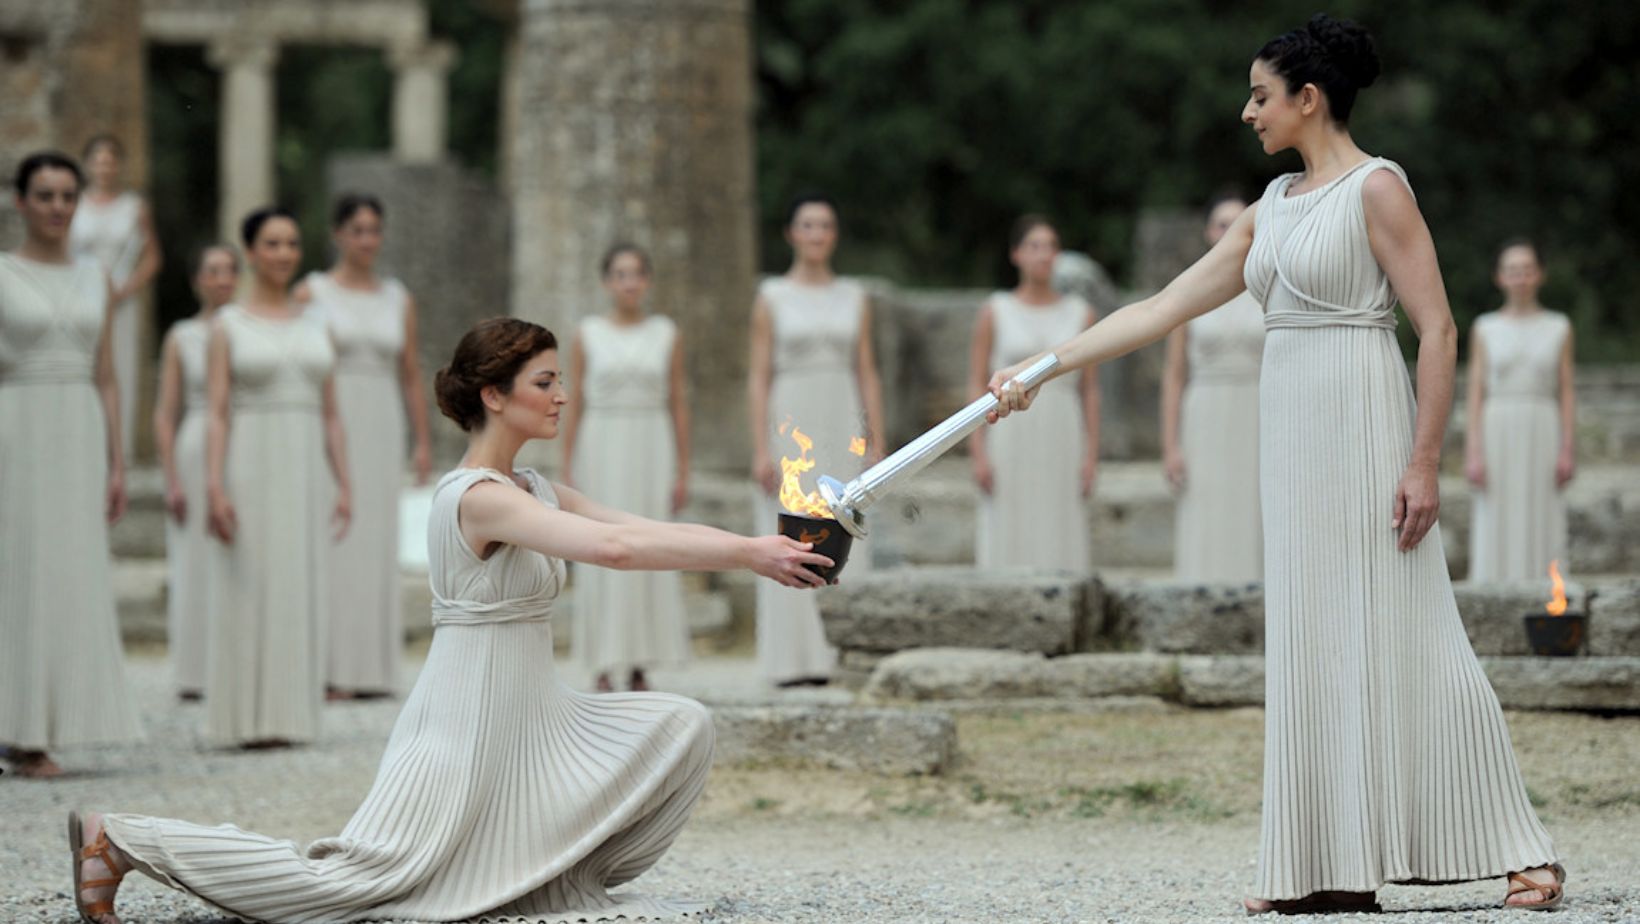 The Sacred Flame and Vestal Virgins, Ancient Roman Religion